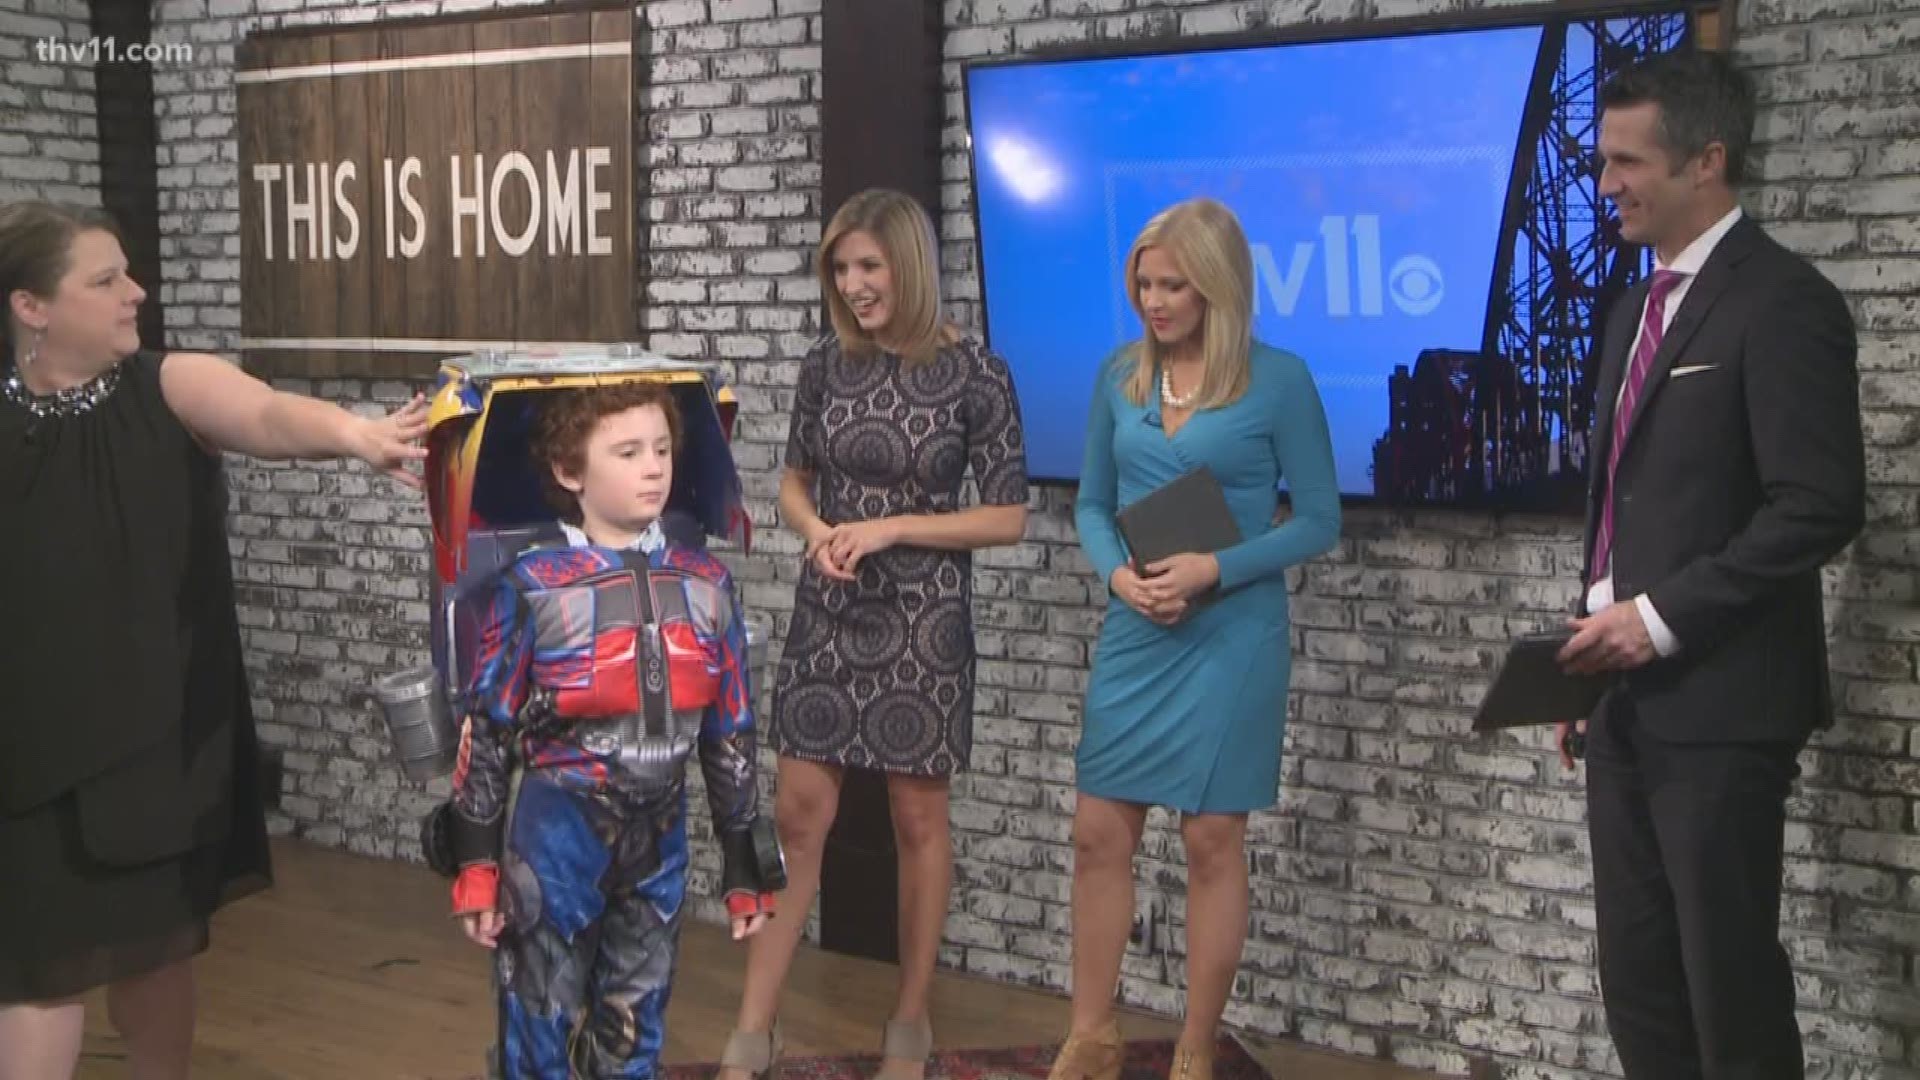 We take a look at how you can make your kid's costume a hit with help from Goodwill.